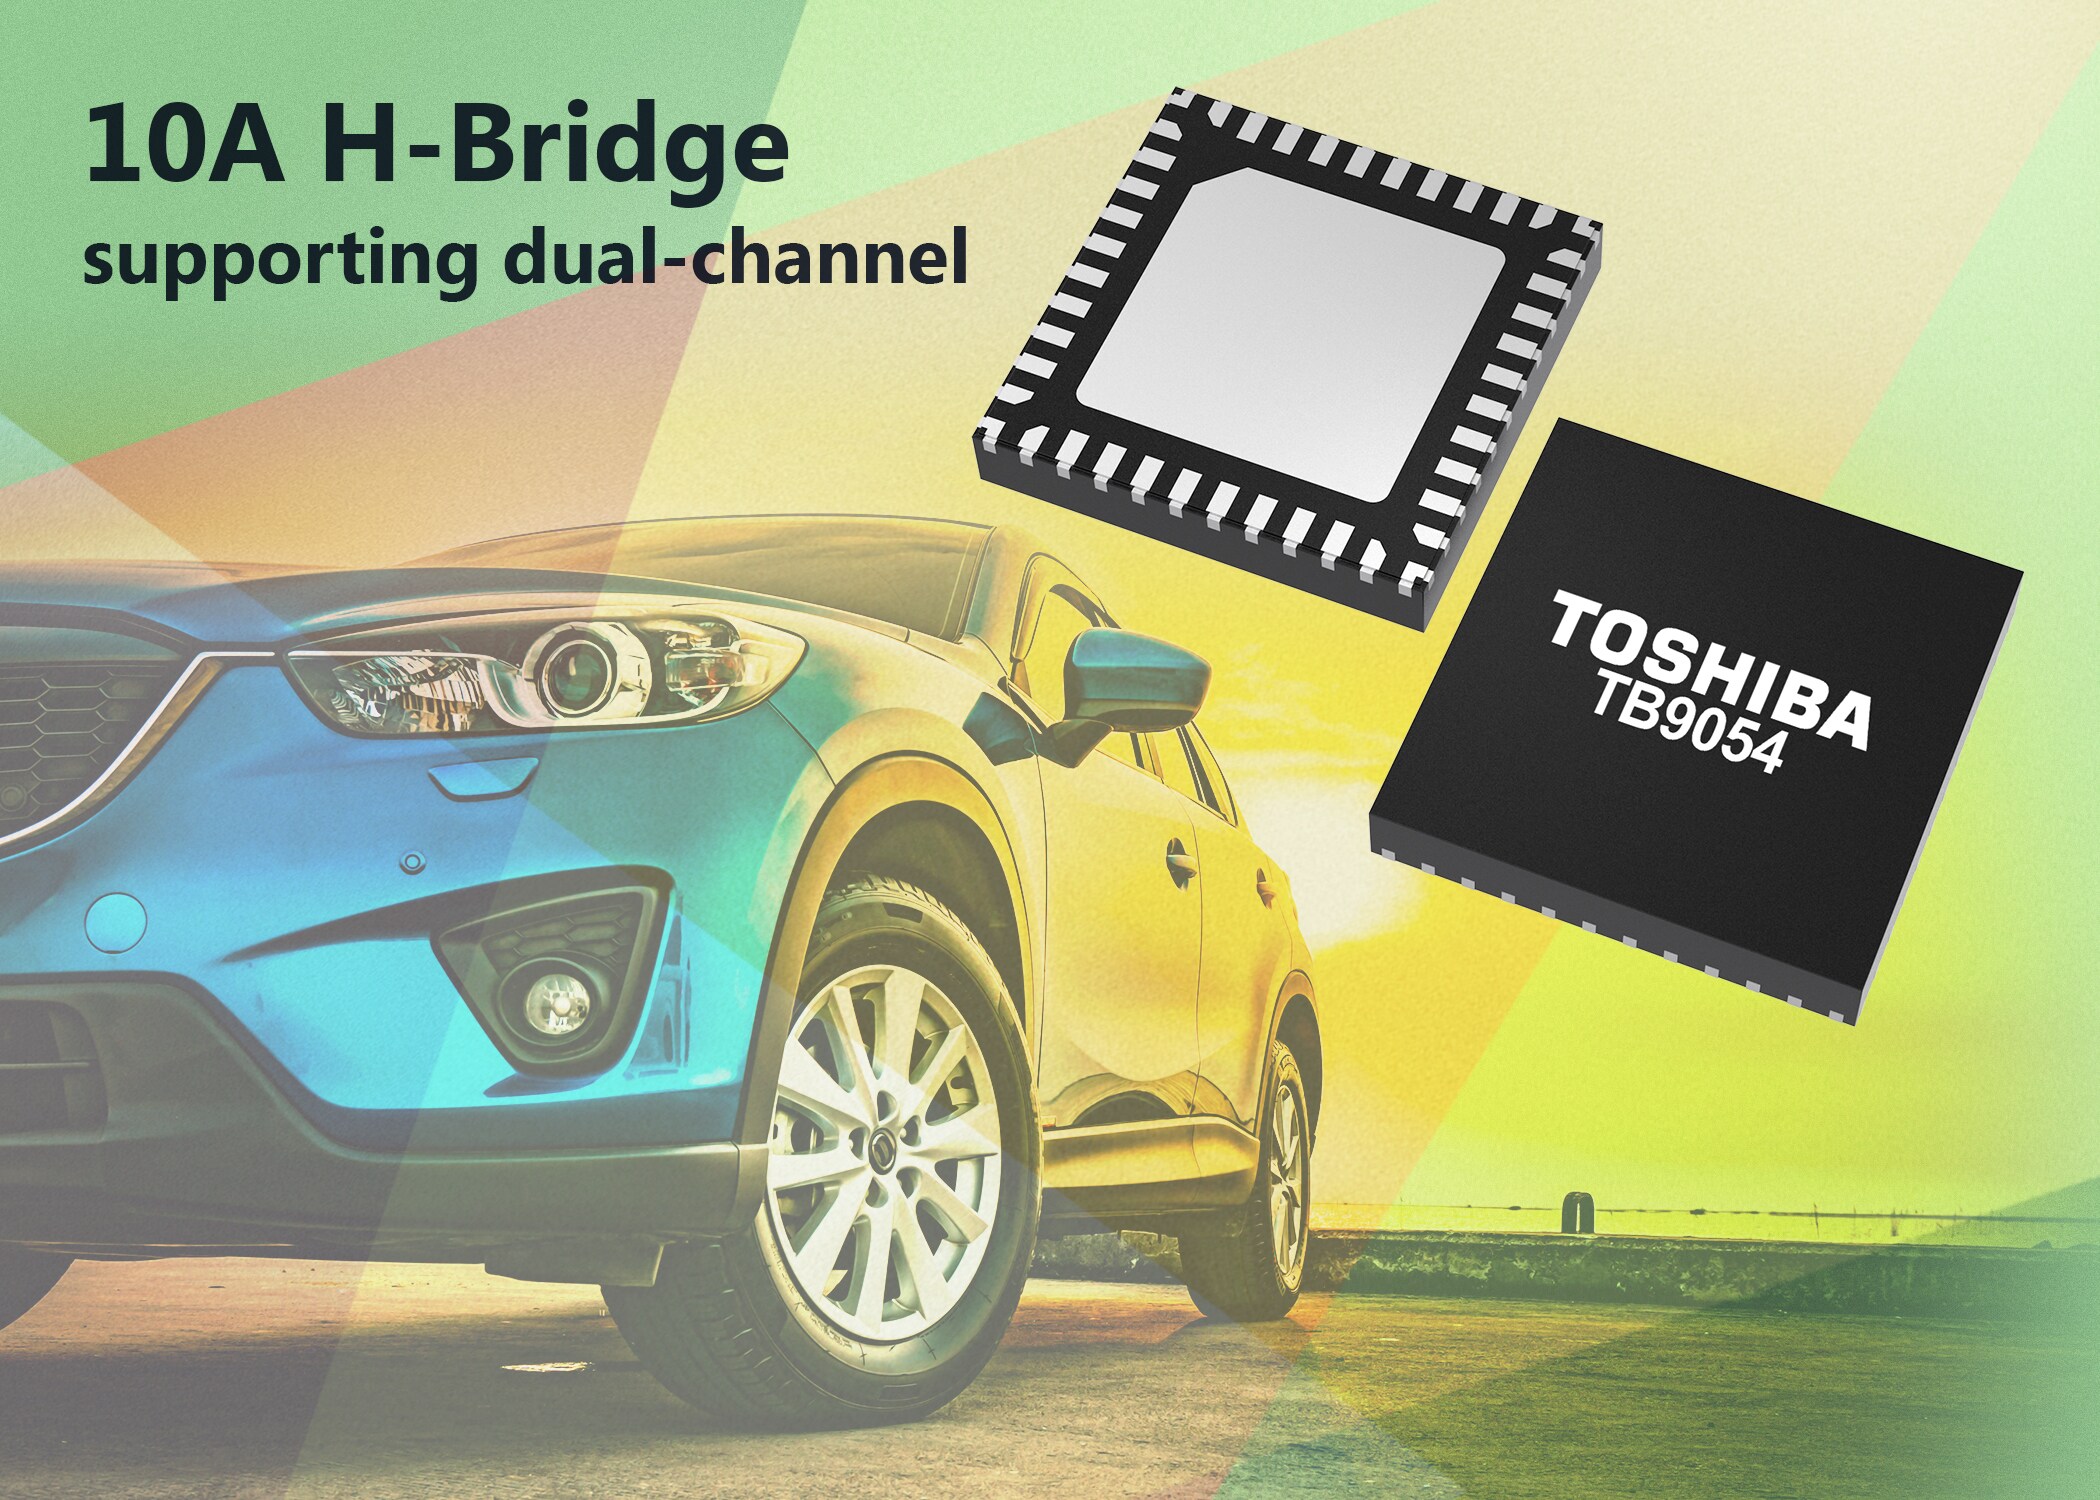 10A H-Bridge Motor Driver ICs from Toshiba Fully Optimised for Automotive Deployment